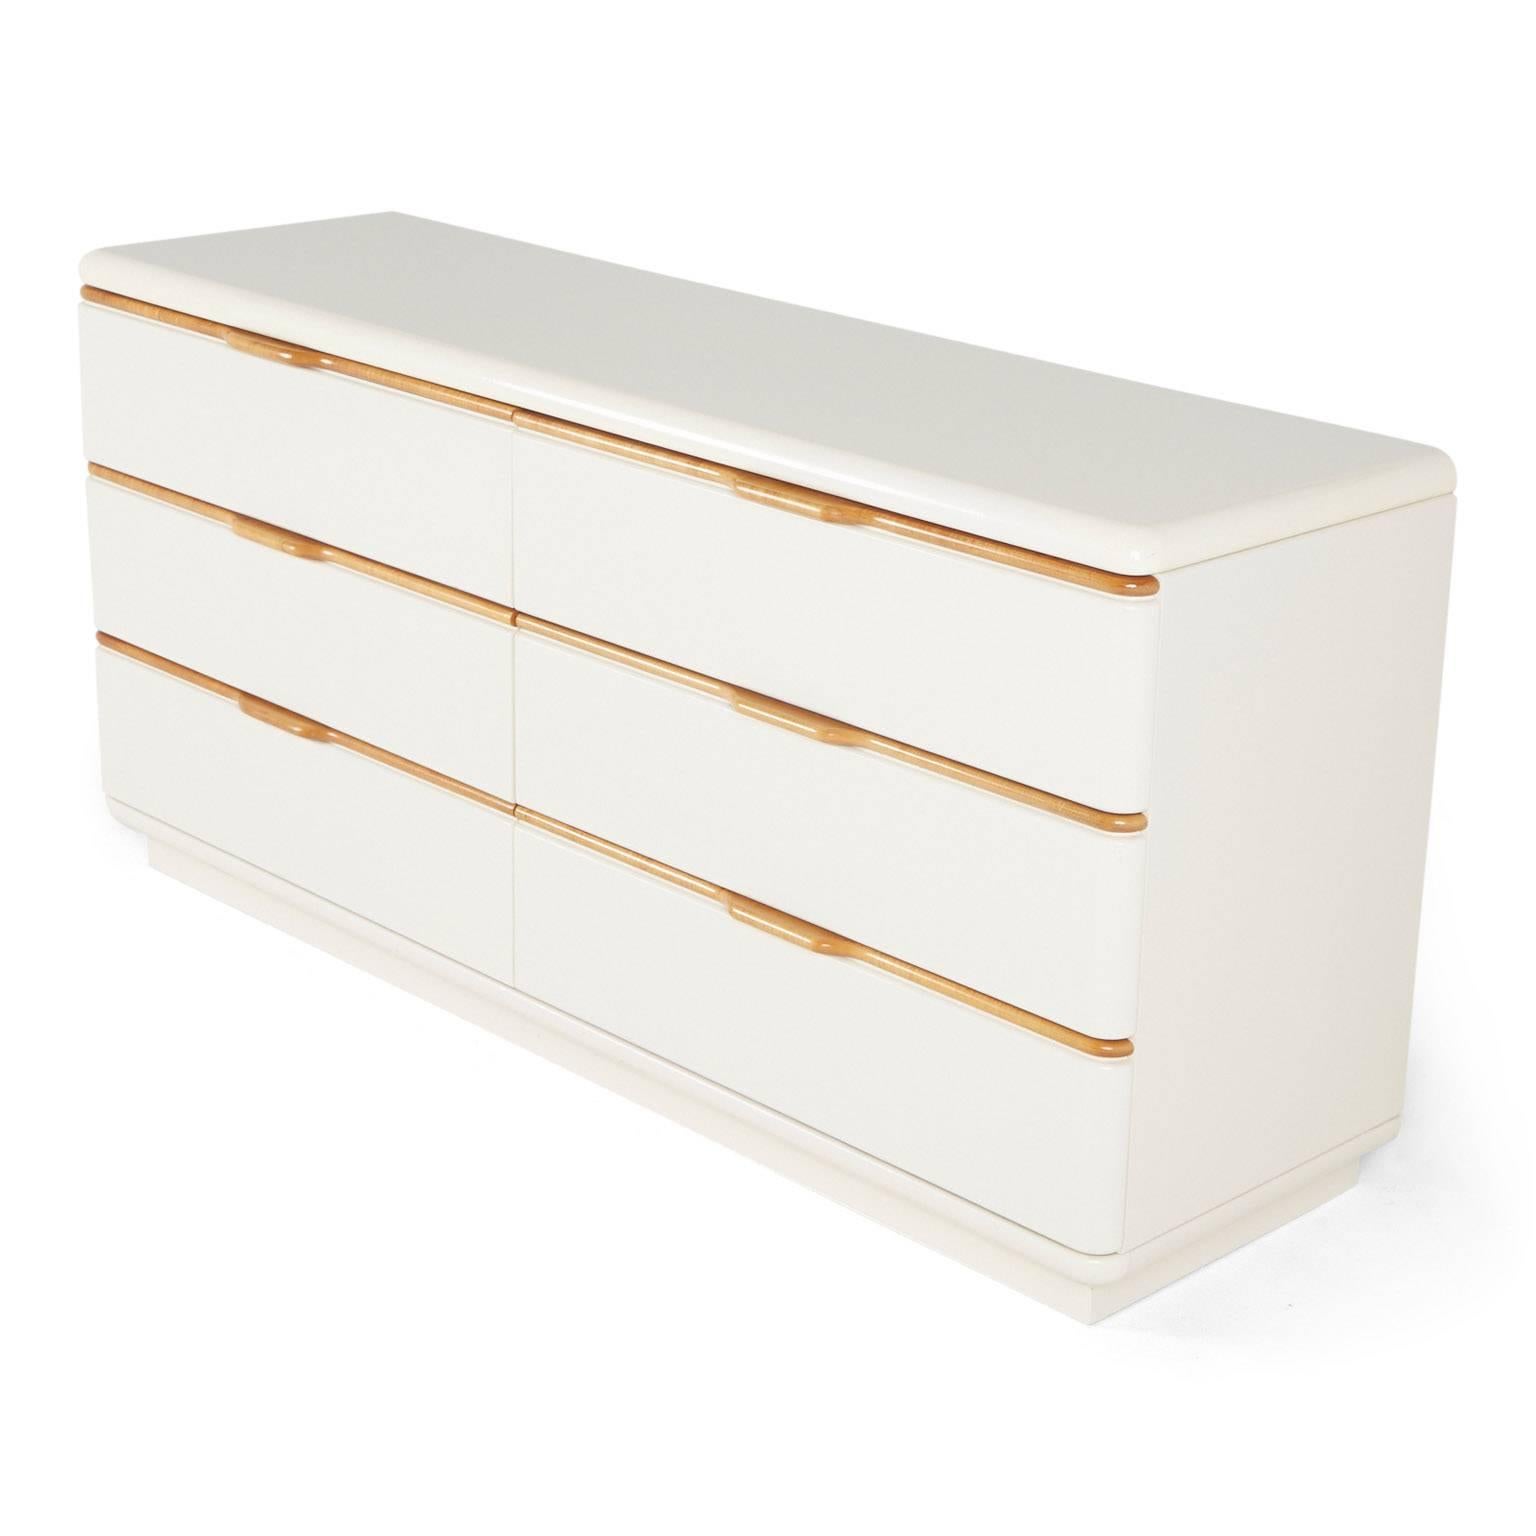 Produced by Lane, this six drawer low chest dresser or credenza is finished in cream colored lacquer with clear coat varnished wooden lip detail on the drawers. 

This piece can be integrated in to a bedroom living room, den, office or playroom